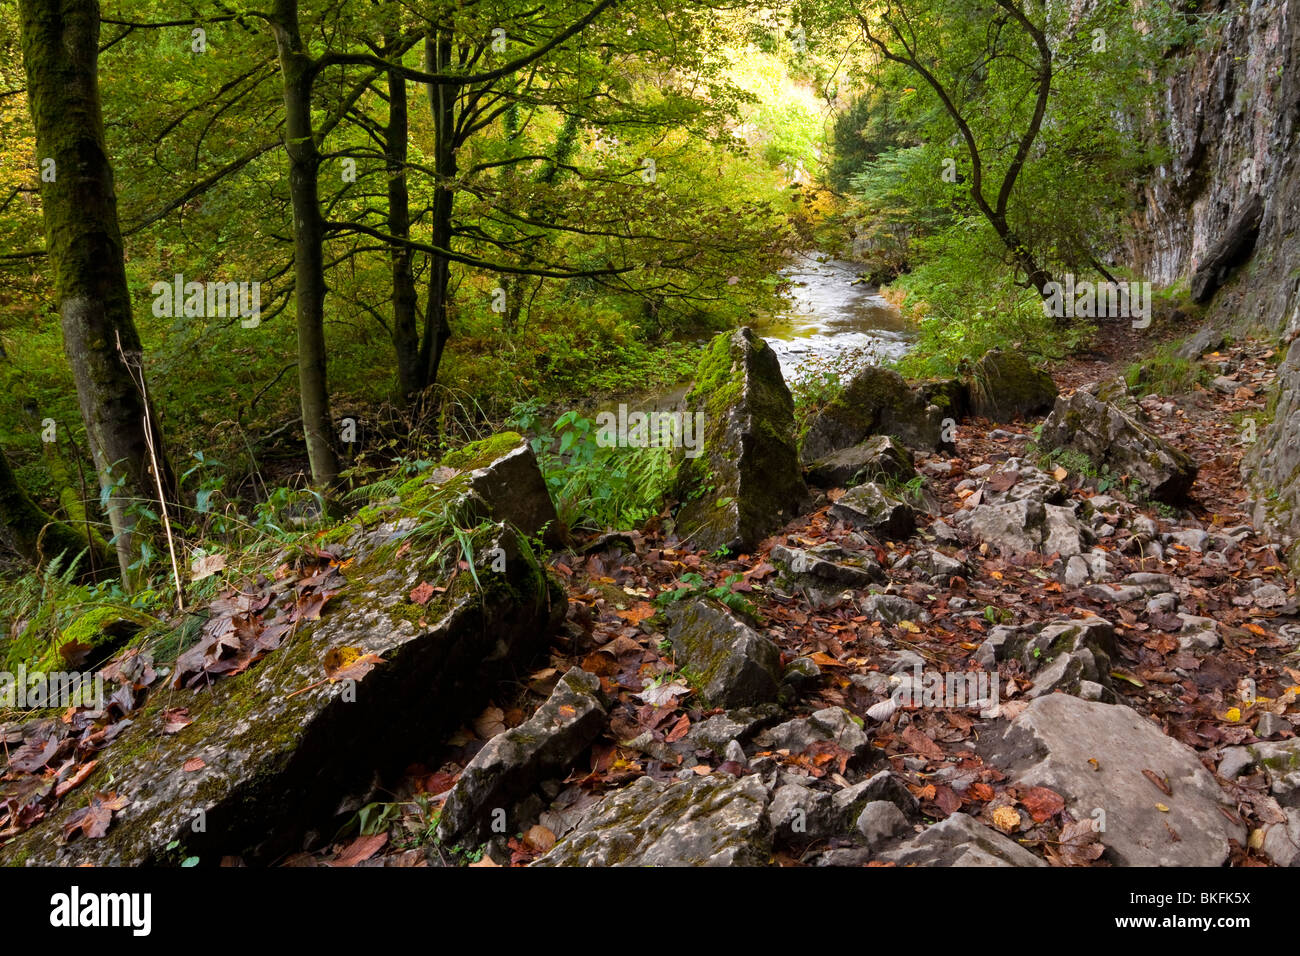 River Wye with rocks in foreground at Chee Dale near Bakewell in the Peak District National Park Derbyshire England UK Stock Photo